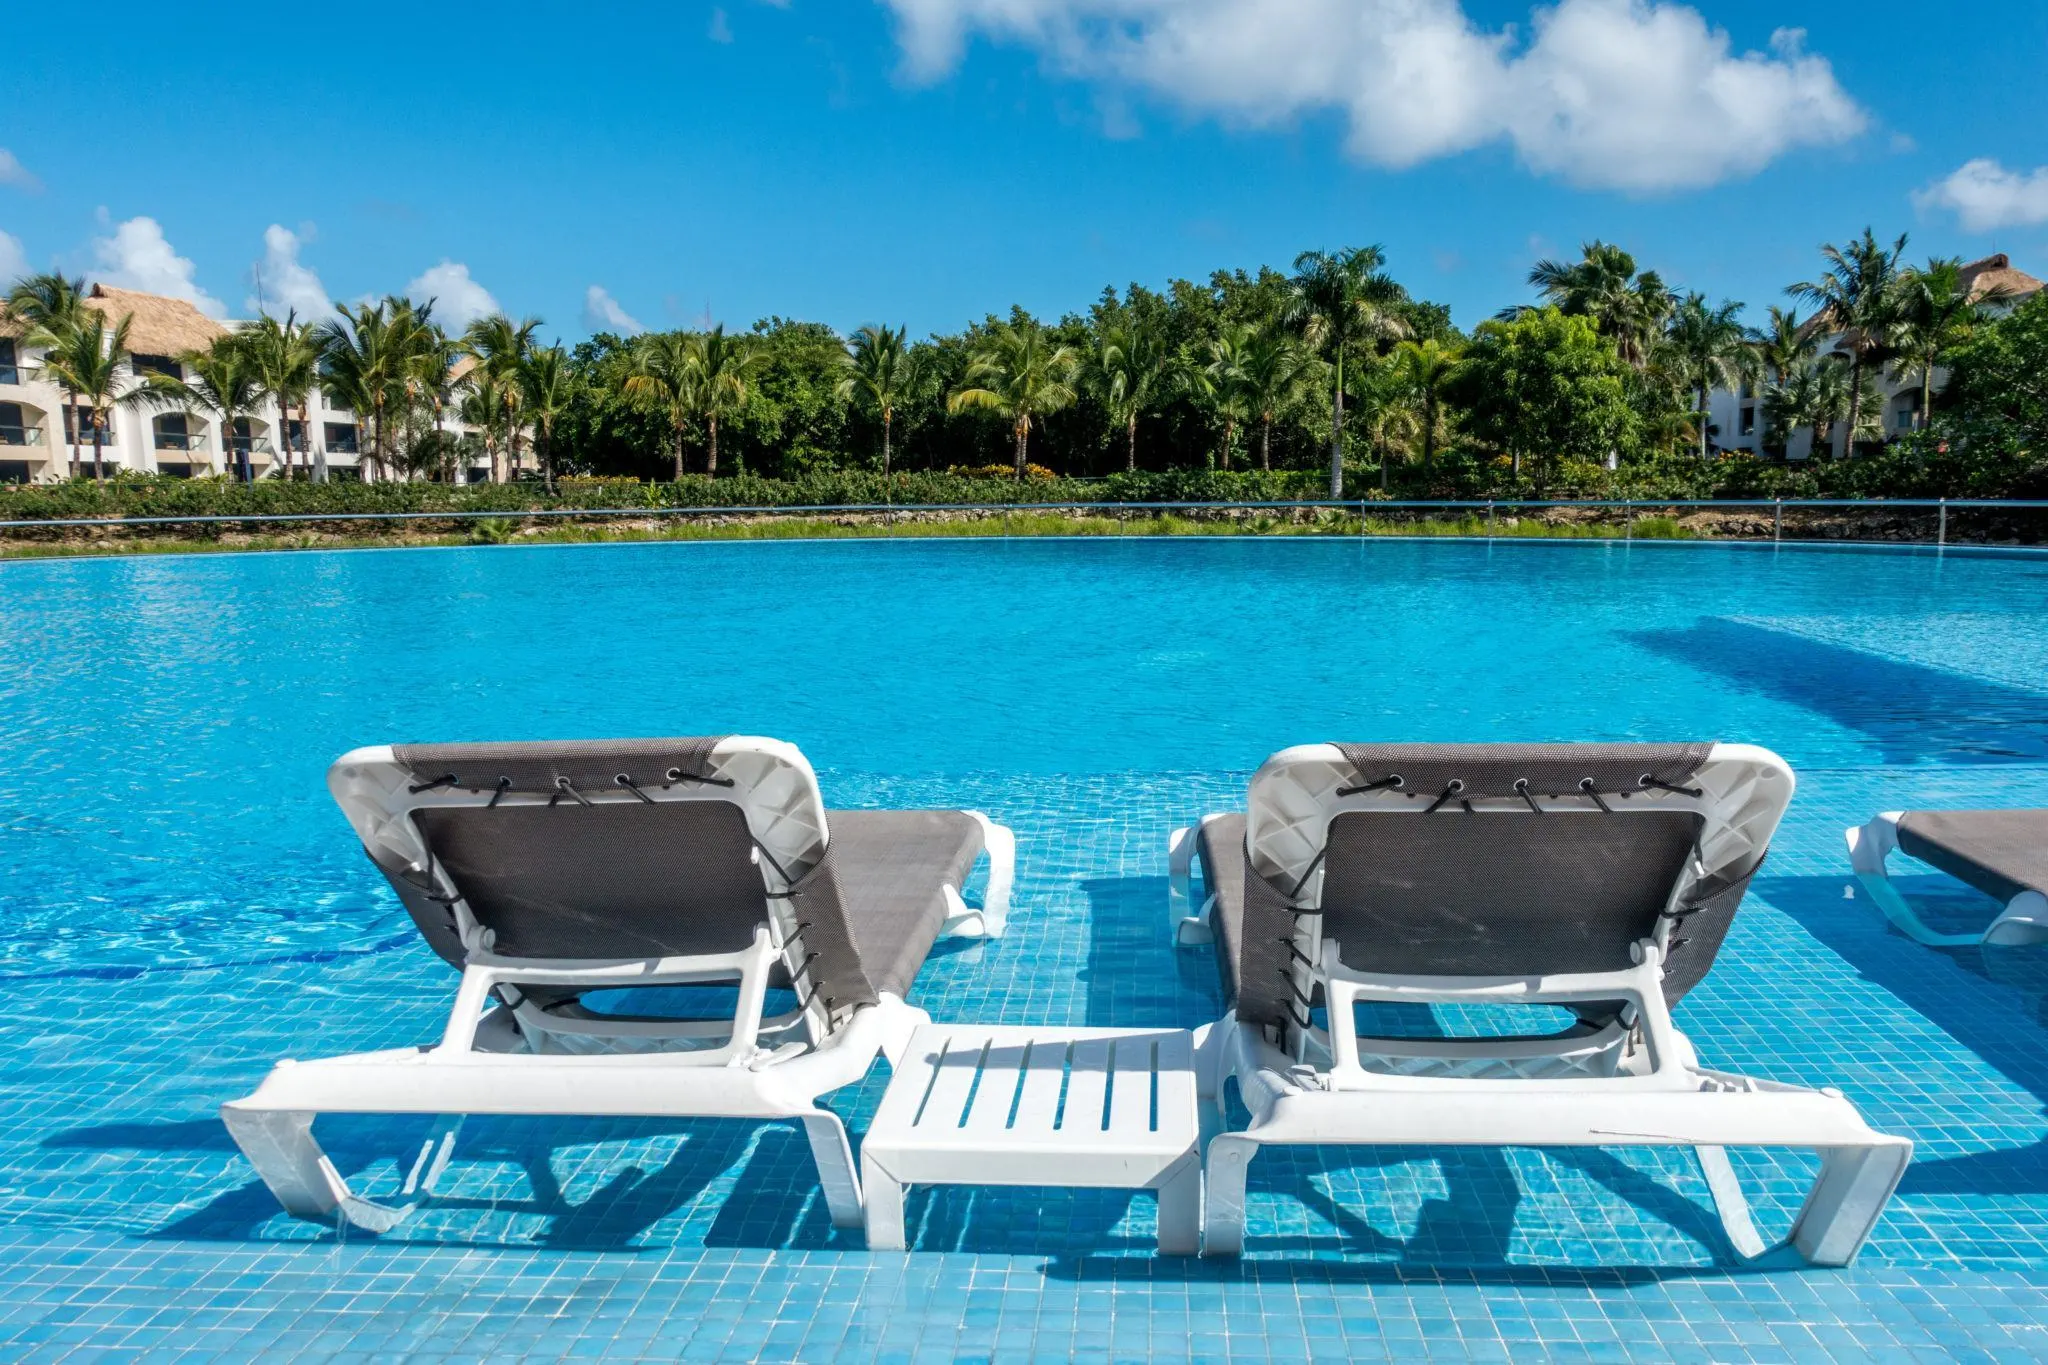 Lounge chairs at the edge of a pool